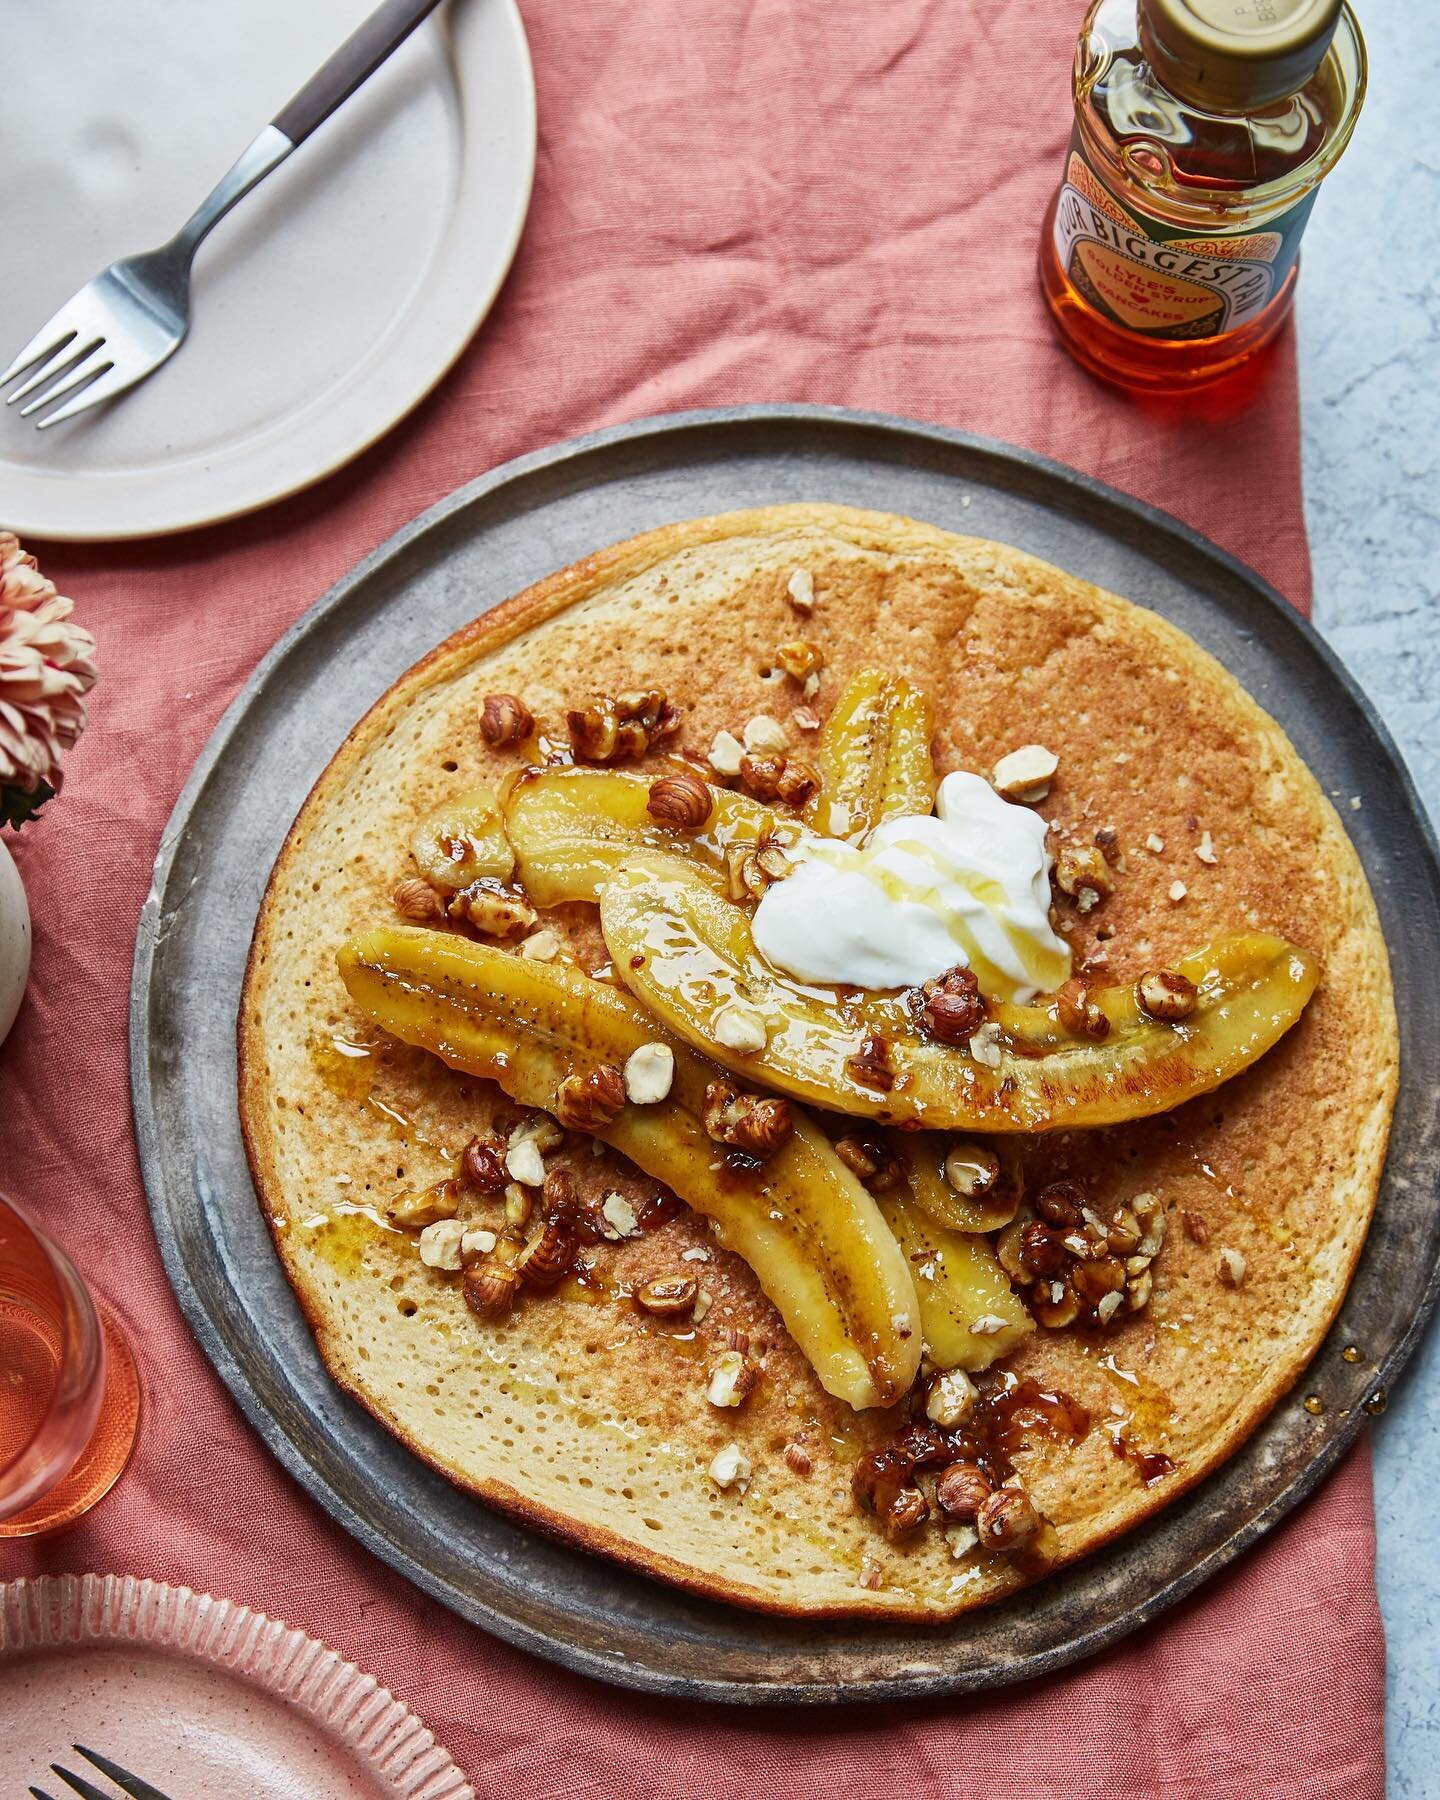 (AD) This pancake day I&rsquo;ll be making a Banana Hazelnut Pancake for 2 💖🥞🍌🌰&ndash; it&rsquo;s like a cross between a souffl&eacute; pancake and an American-style pancake, with beaten egg whites folded in for a fluffy texture ☁️😇. The topping